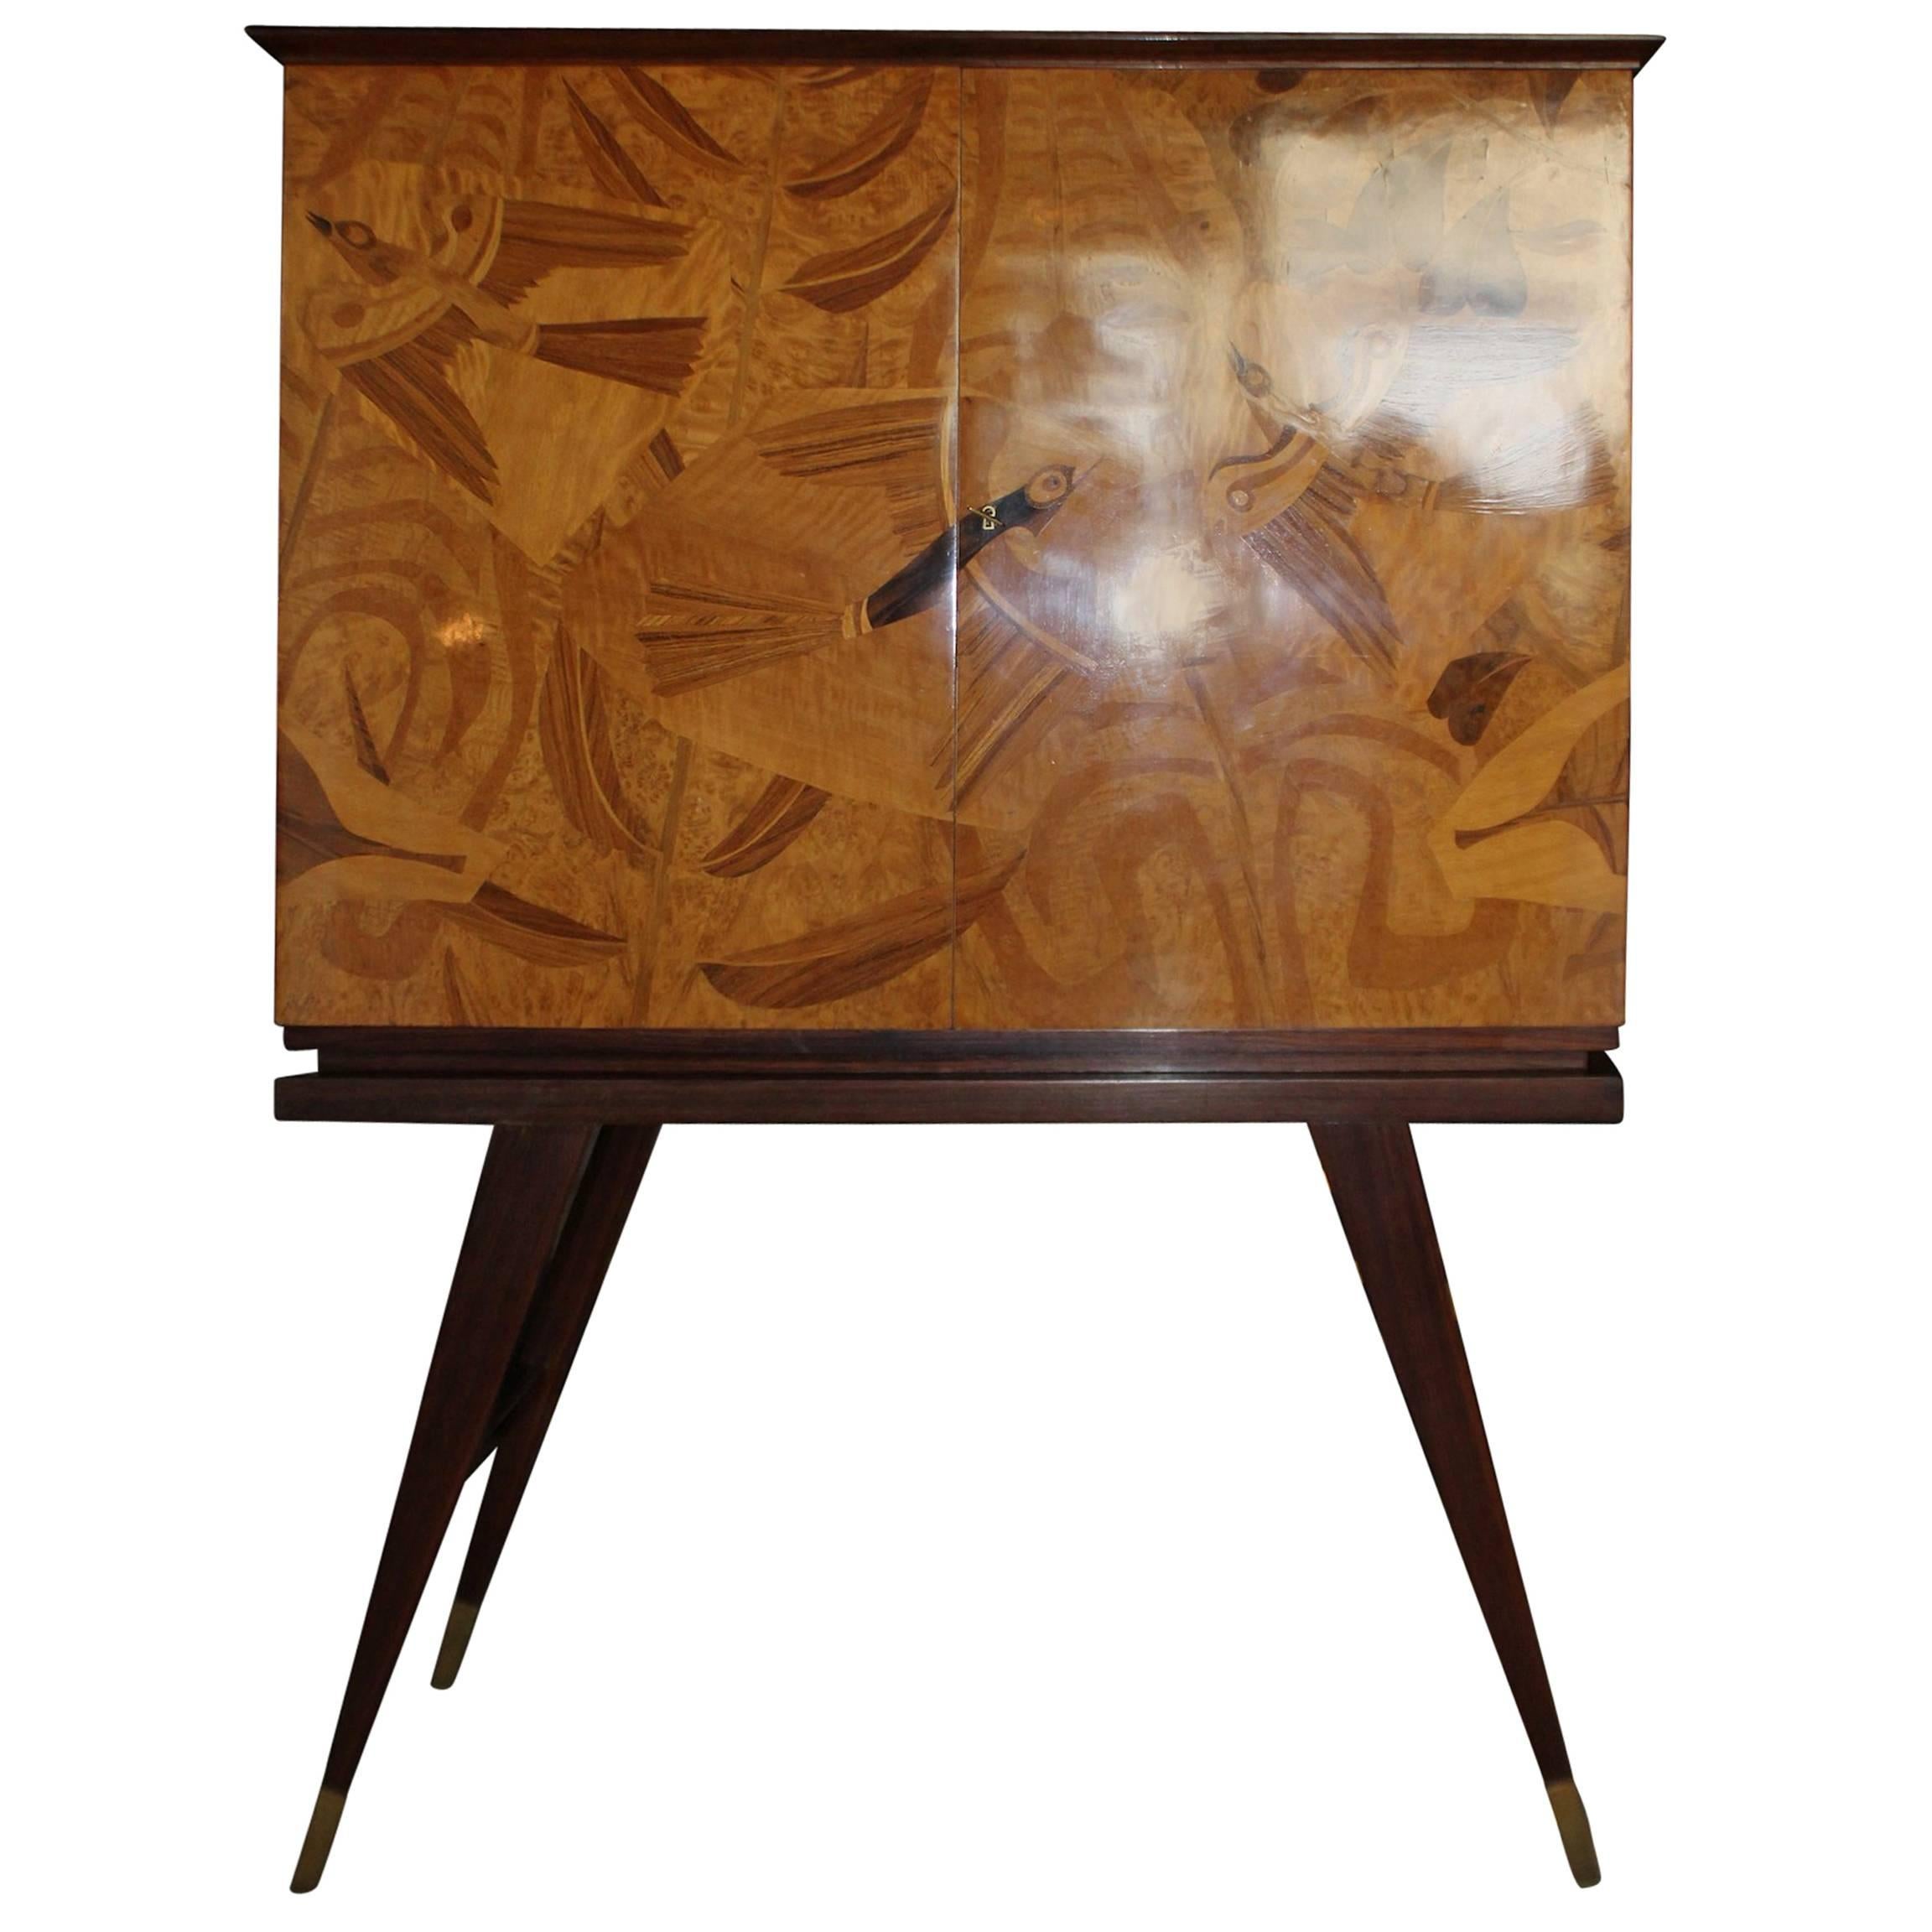 1950 Cabinet Bar of "Colli" Turin in Inlaid Sycamore